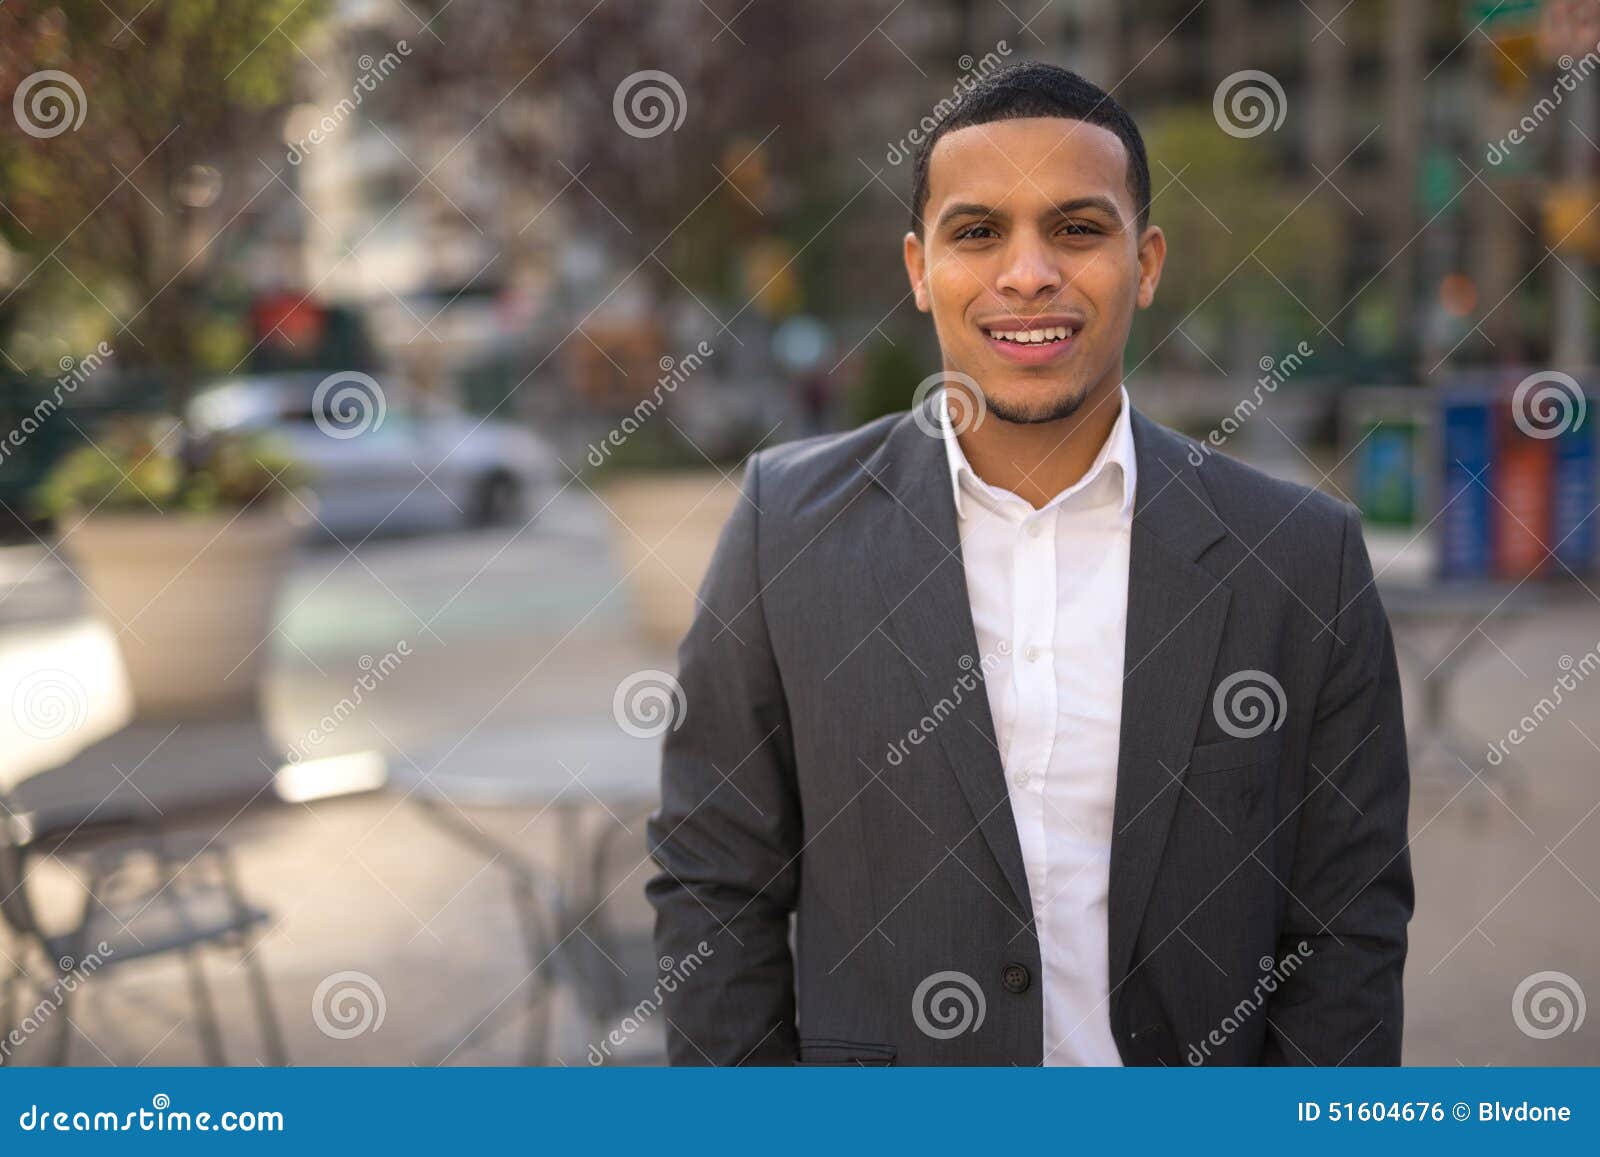 young latino man in city smile face